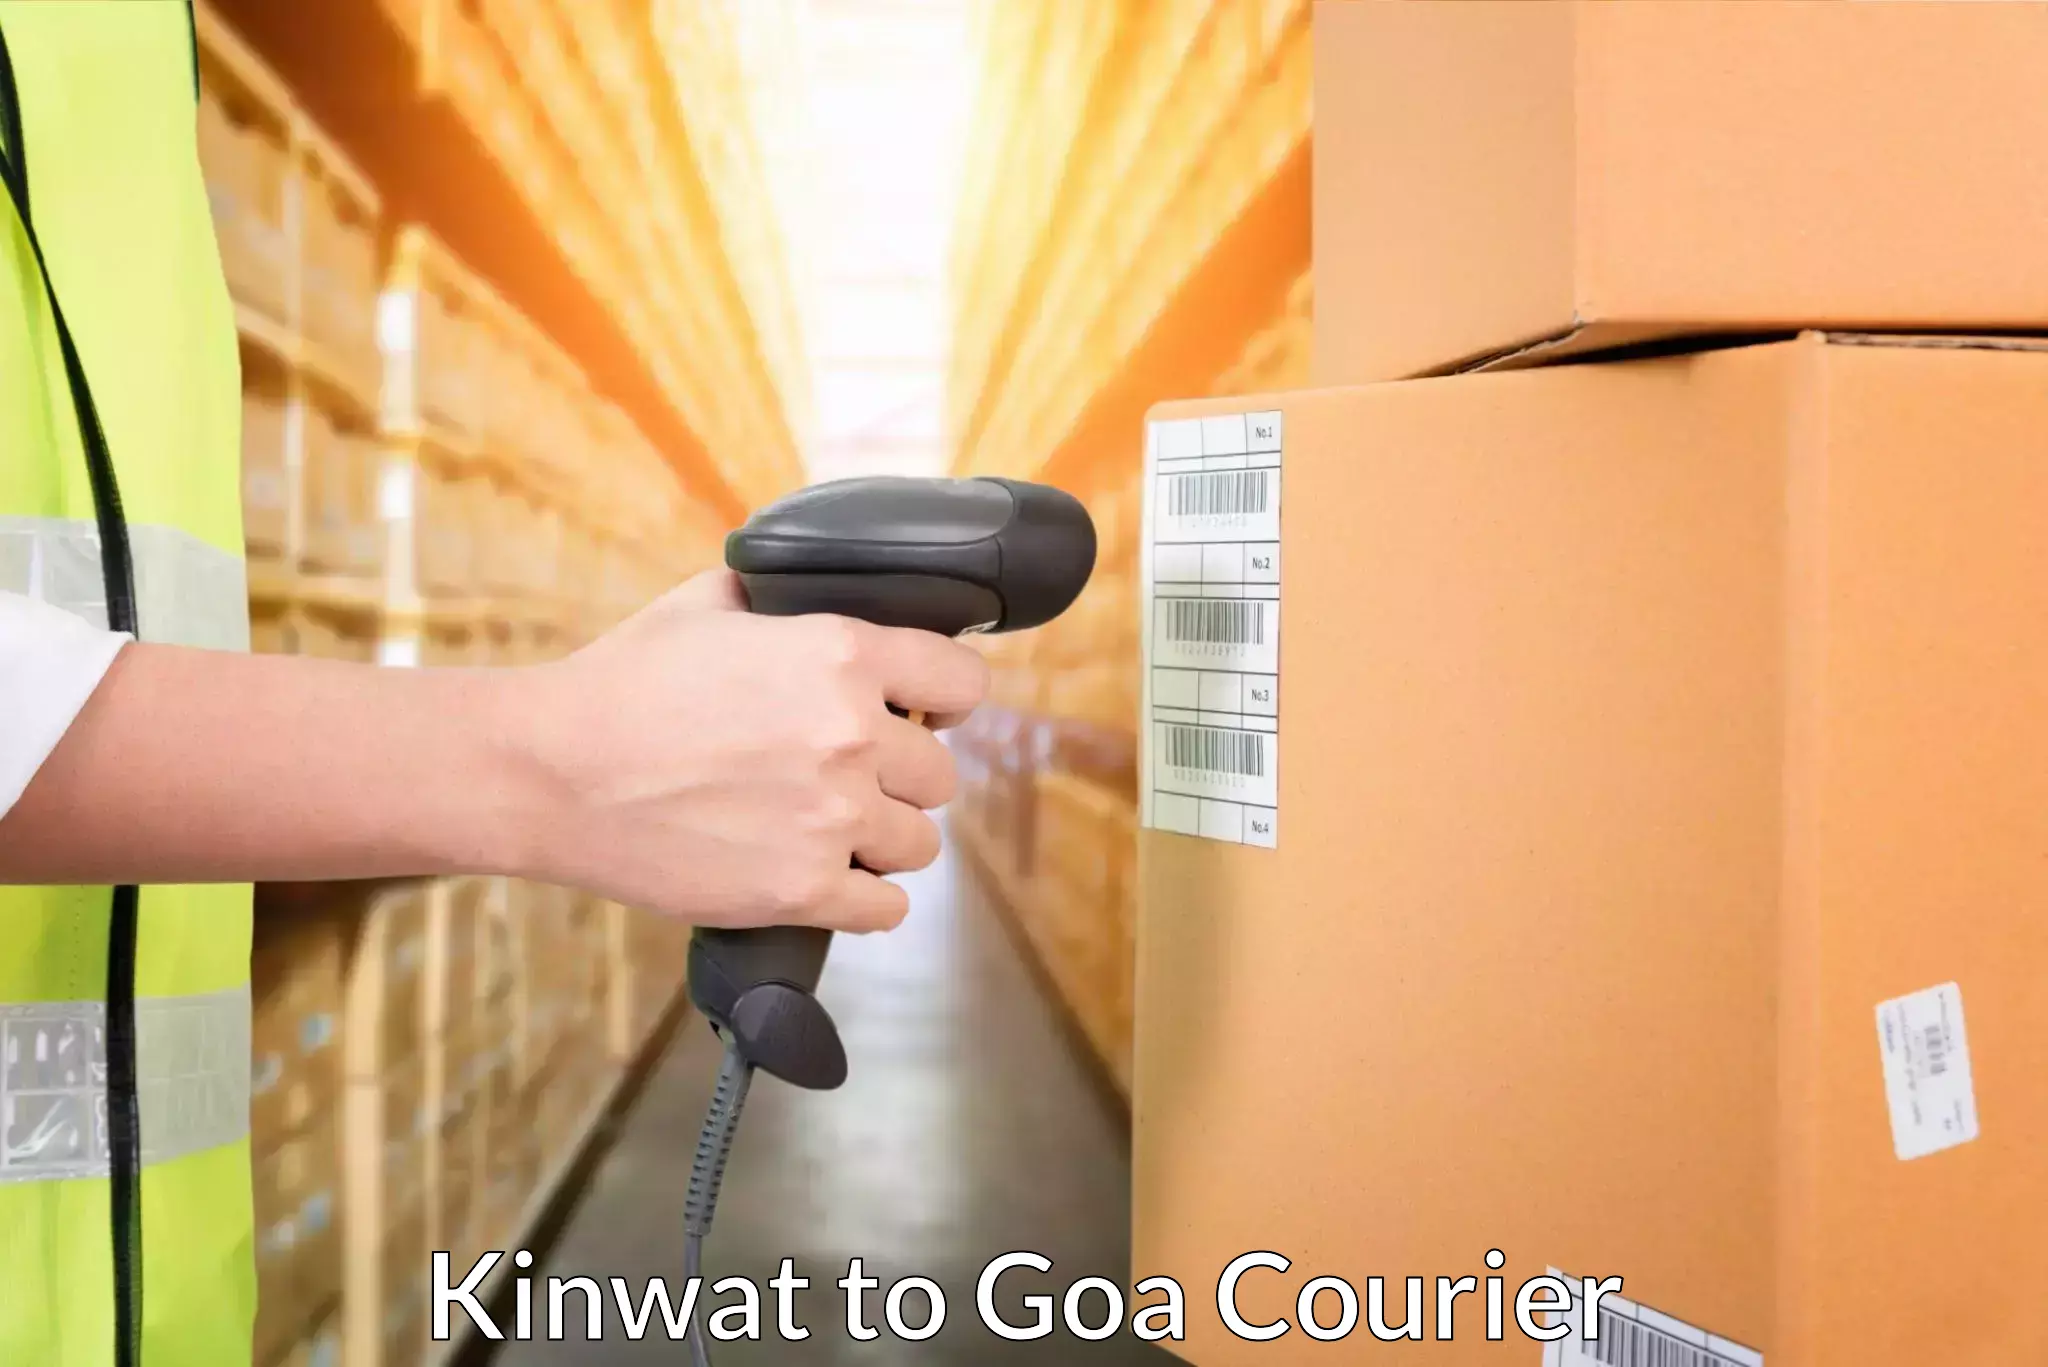 Courier service booking Kinwat to Goa